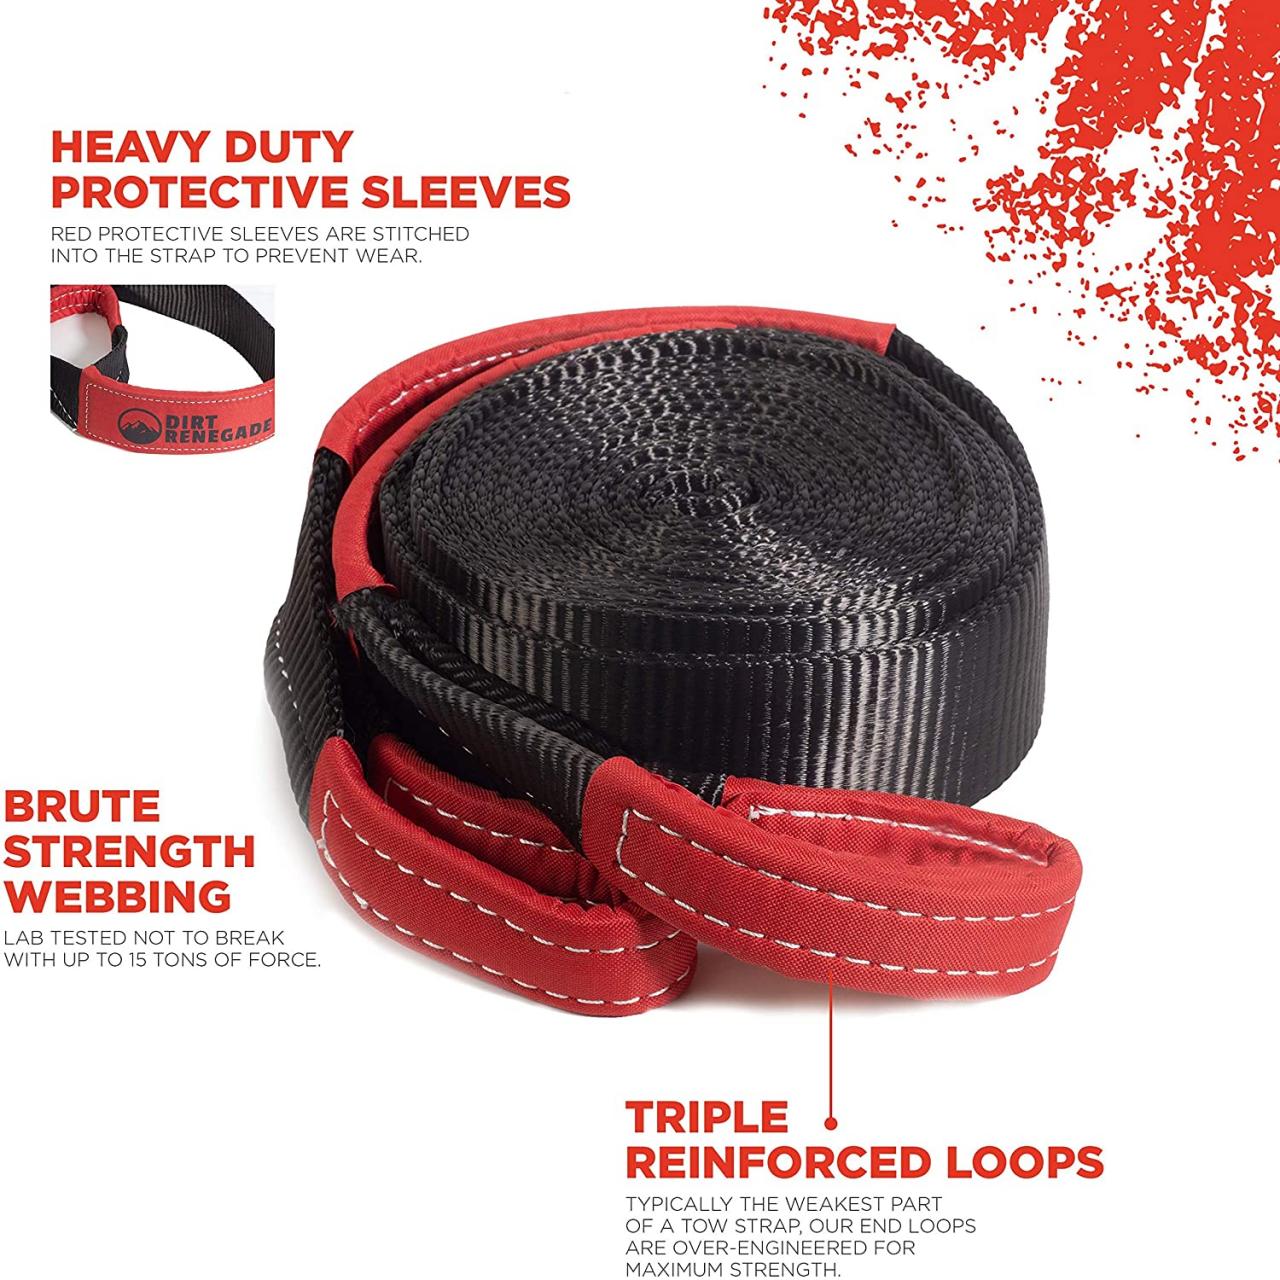 Buy Tow Strap - 30ft x 3 Recovery Strap - 12 Ton Strength - Triple Reinforced  Loops - Heavy Duty Carry Bag - Best 30 Foot Tow Straps for Car, Truck, Off  Road Vehicle, Snowmobile Online in Indonesia. B07W4GR22D